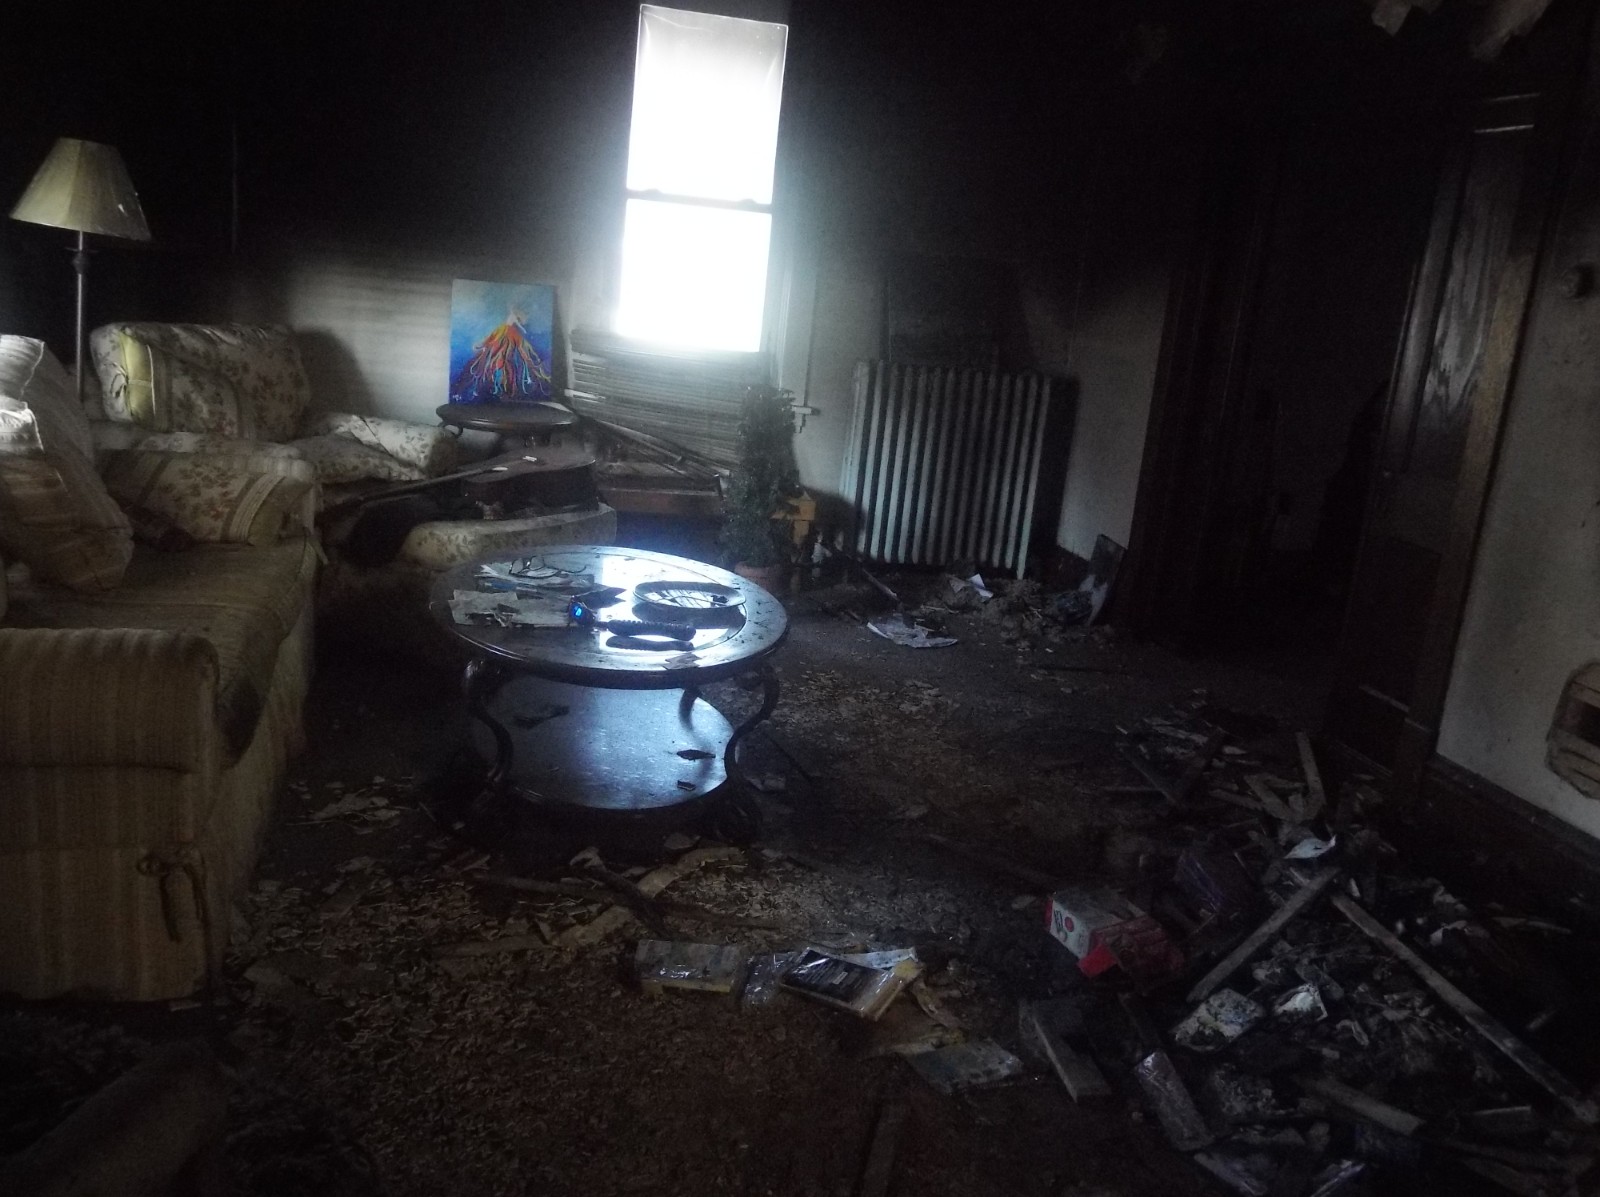 If you experience fire damage in your home or business, SERVPRO of Ebensburg is Here to Help. Give us a call!